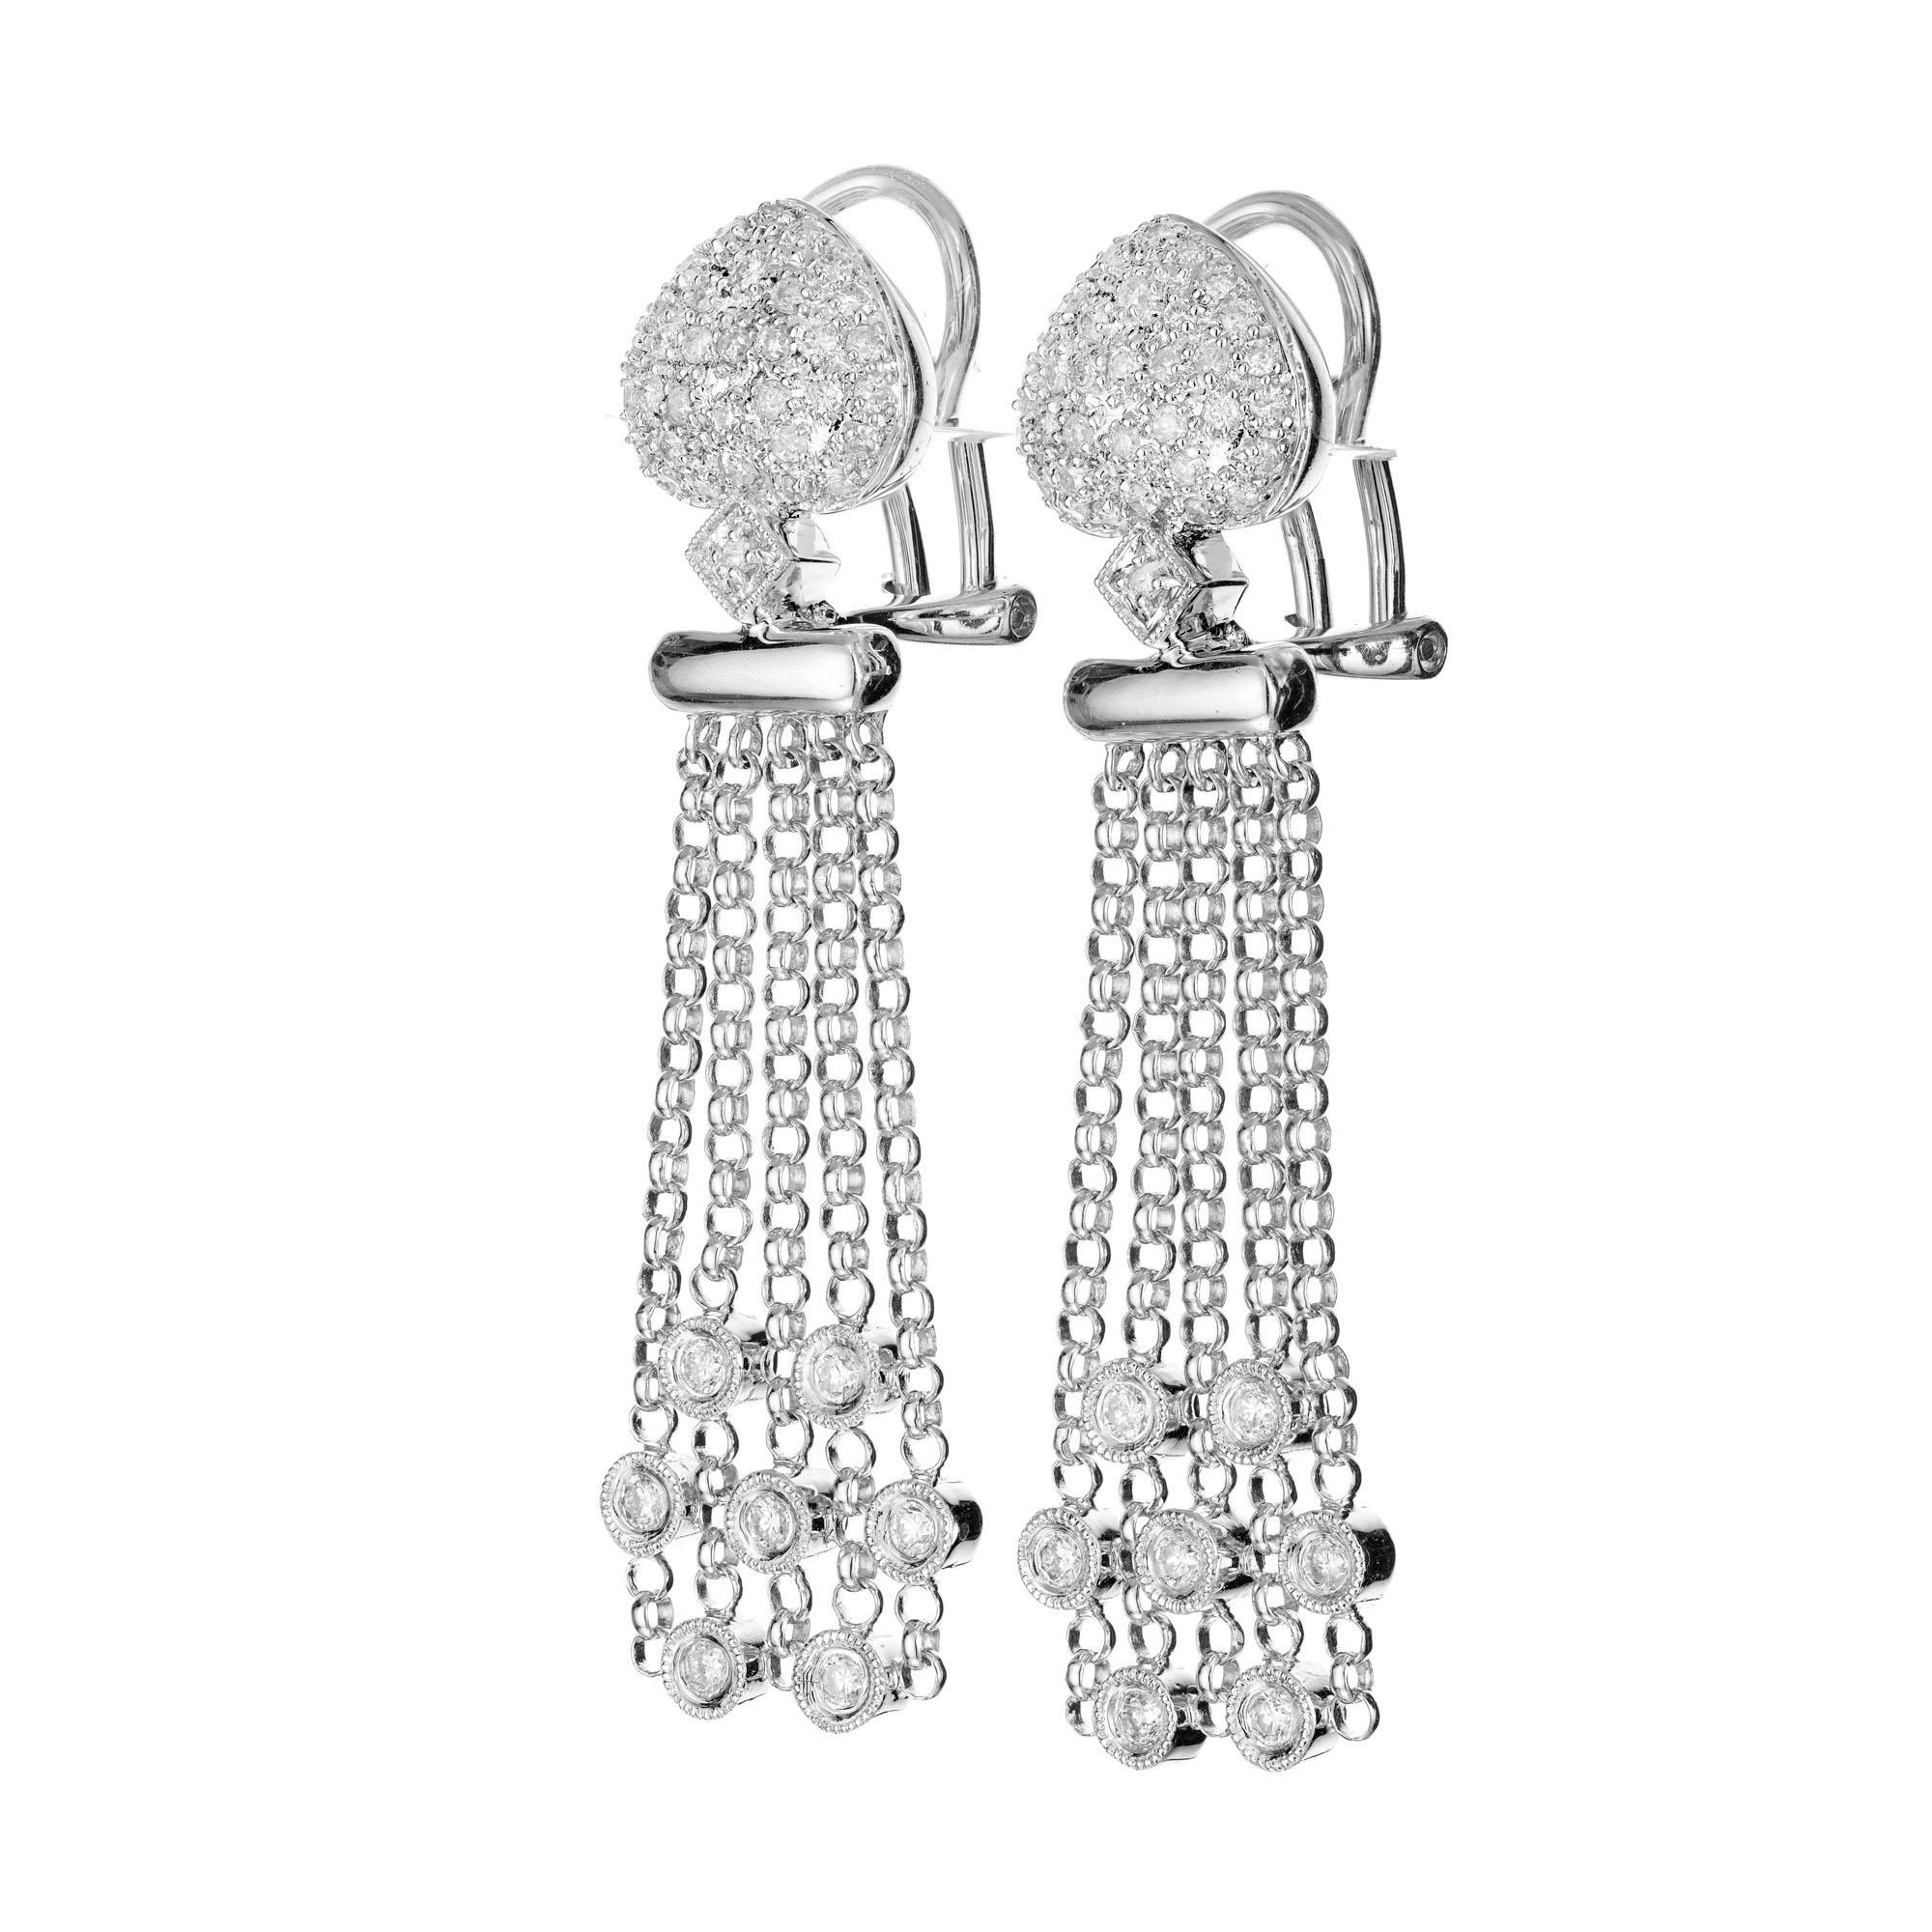 Diamond clip post dangle earrings. 82 round diamonds set in 18k yellow and white gold. Upside down heart shaped tops each with 5 drops of bezel set round diamonds. 

82 round diamonds, H-I SI-I approx. .70cts
18k white gold 
18k yellow gold